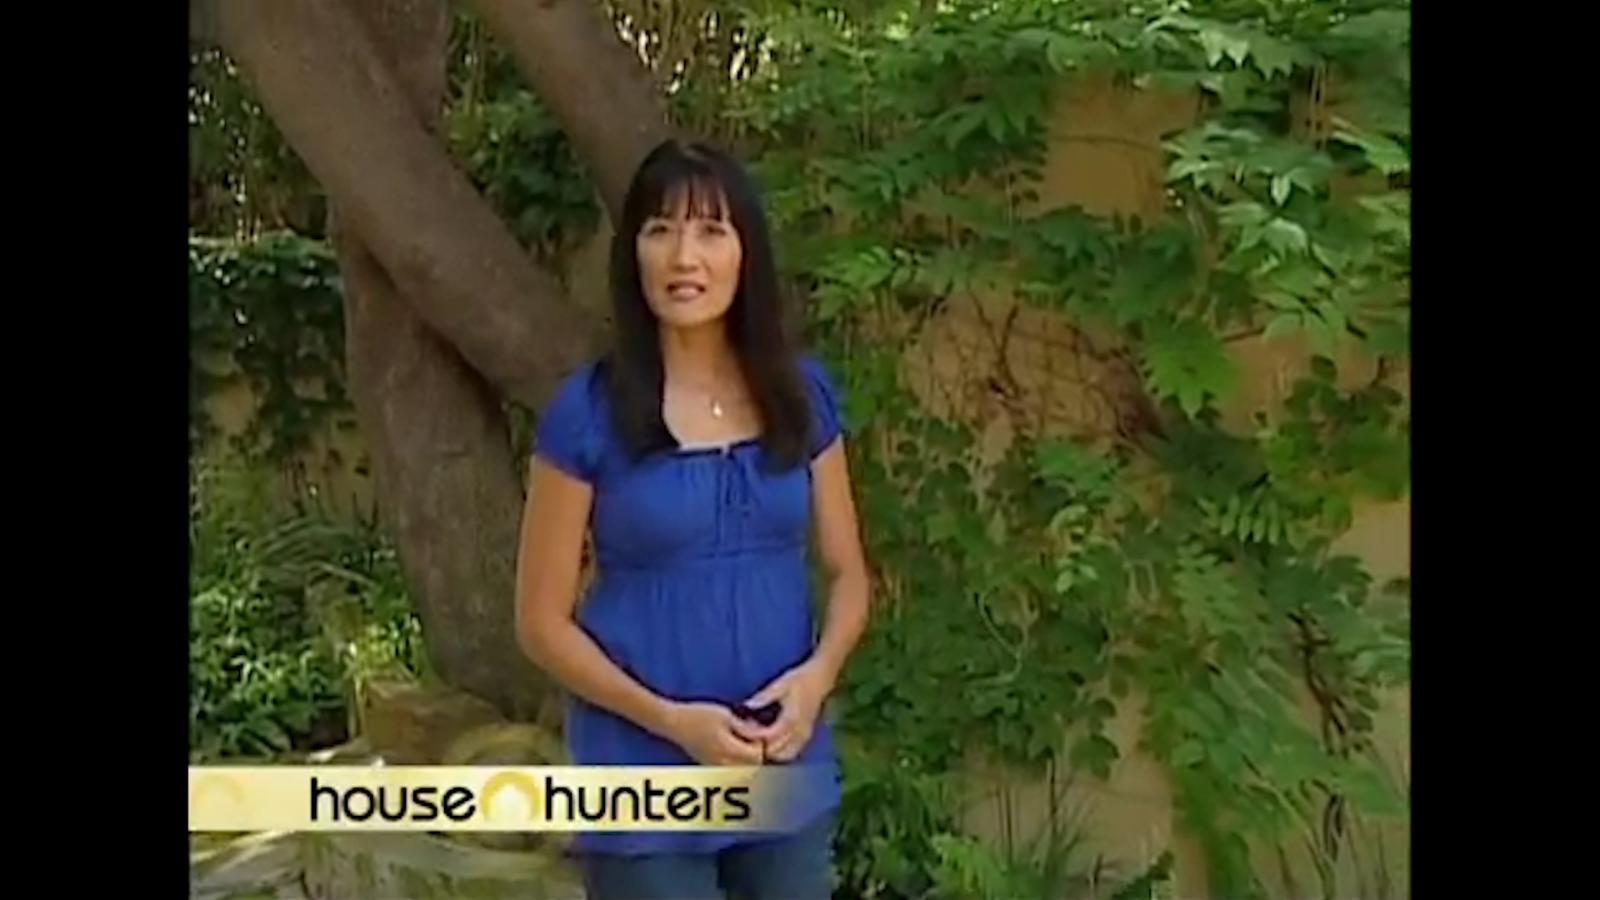 Suzanne Whang, 'House Hunters' host, dies at 56 CNN